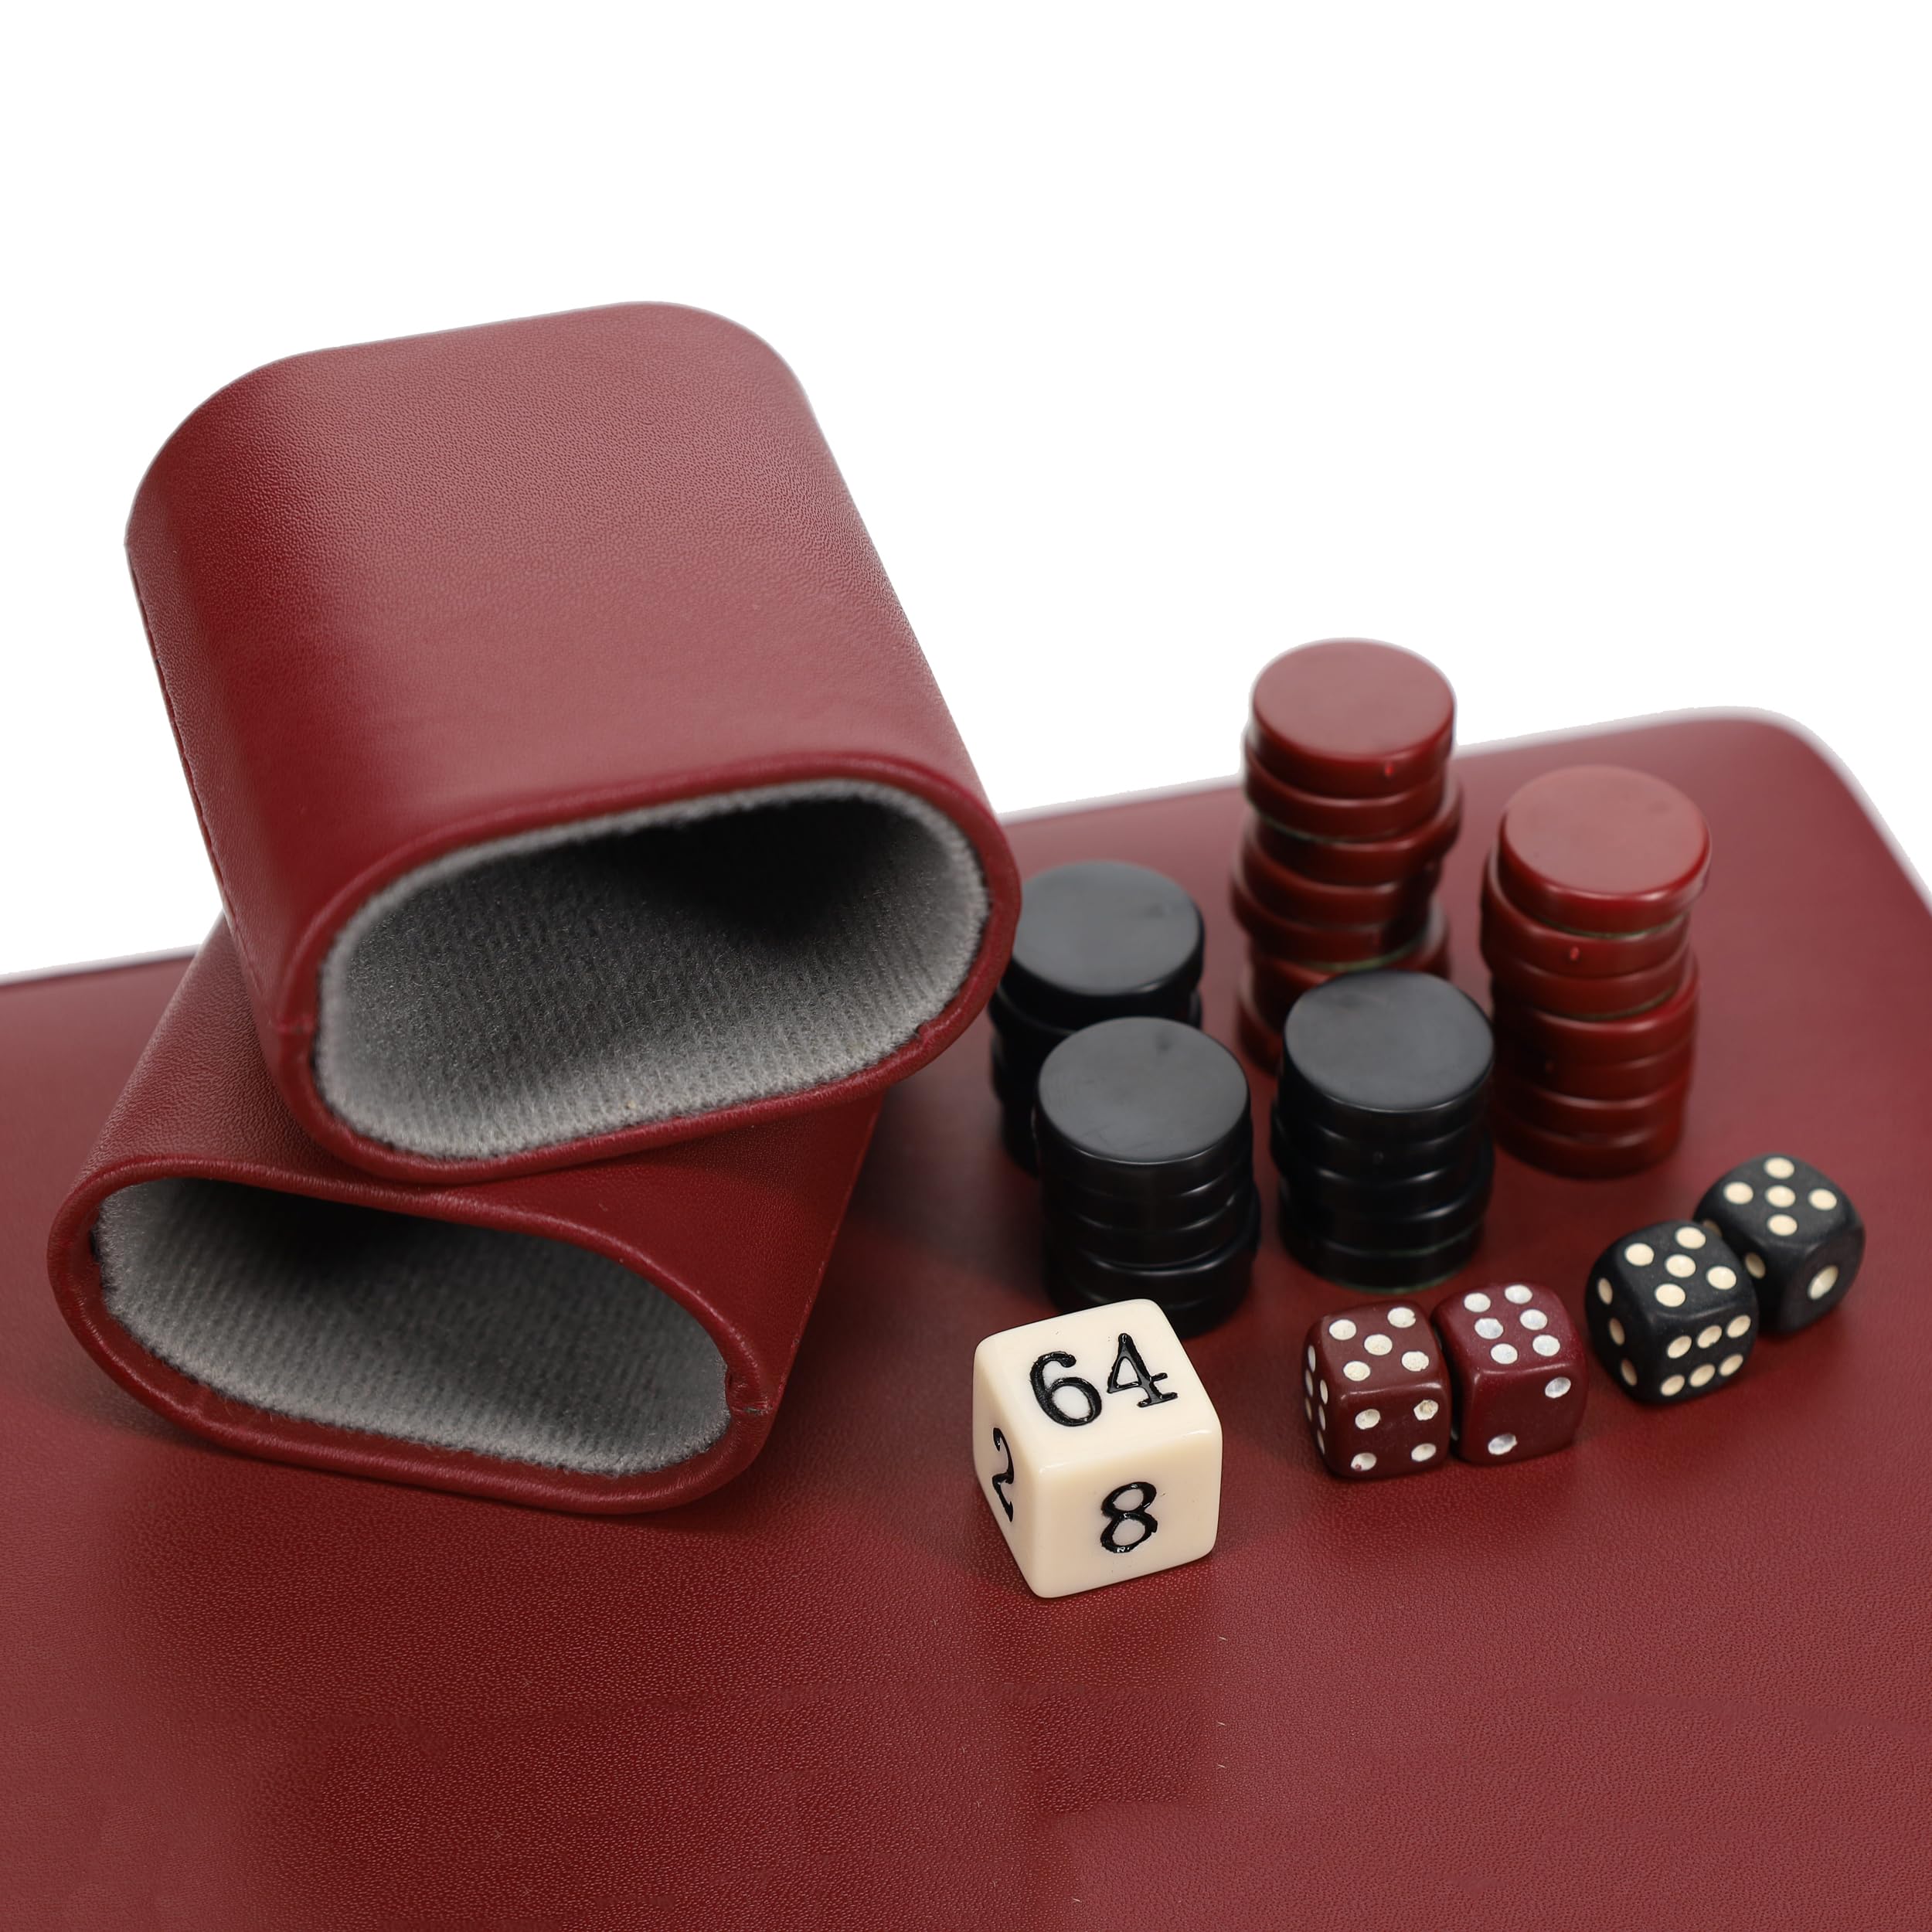 WE Games Backgammon Set, Board Games for Adults - Travel Games - Magnetic with Burgundy Leatherette Backgammon Board and Carrying Strap - Travel Backgammon Sets for Adults